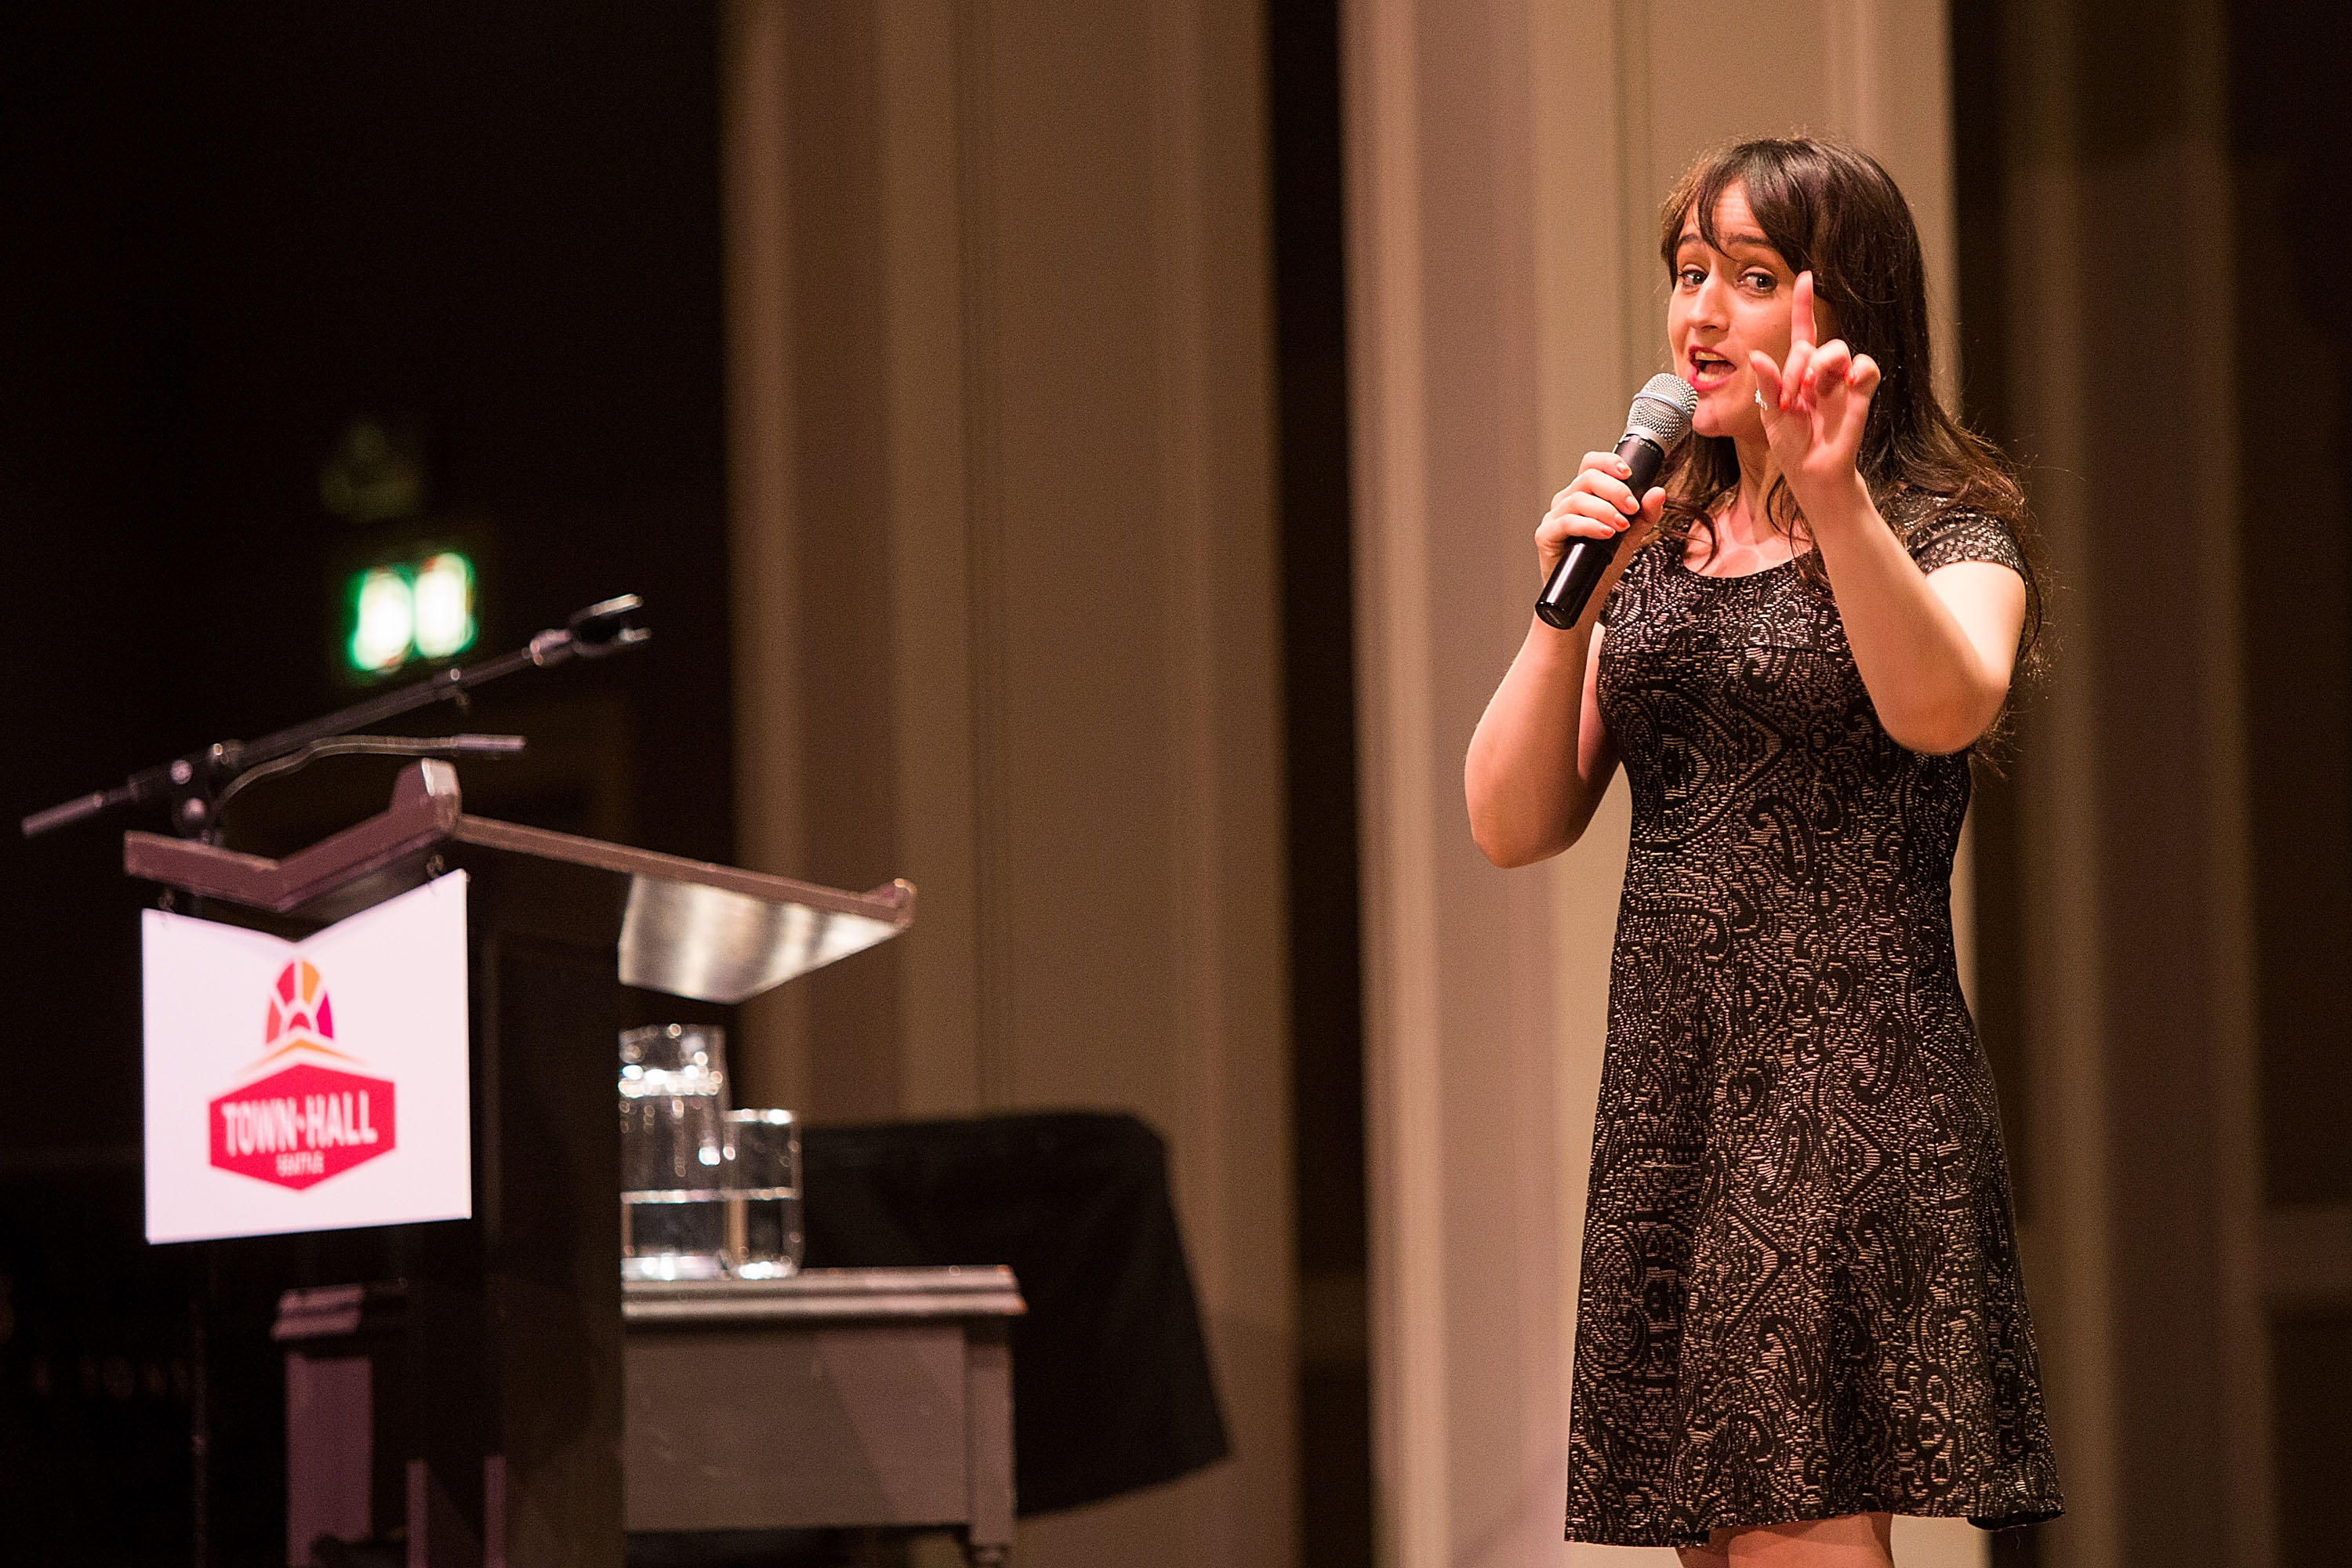 Mara Wilson speaks about her new book at Town Hall Seattle in Seattle, Washington, on September 21, 2016. | Source: Getty Images